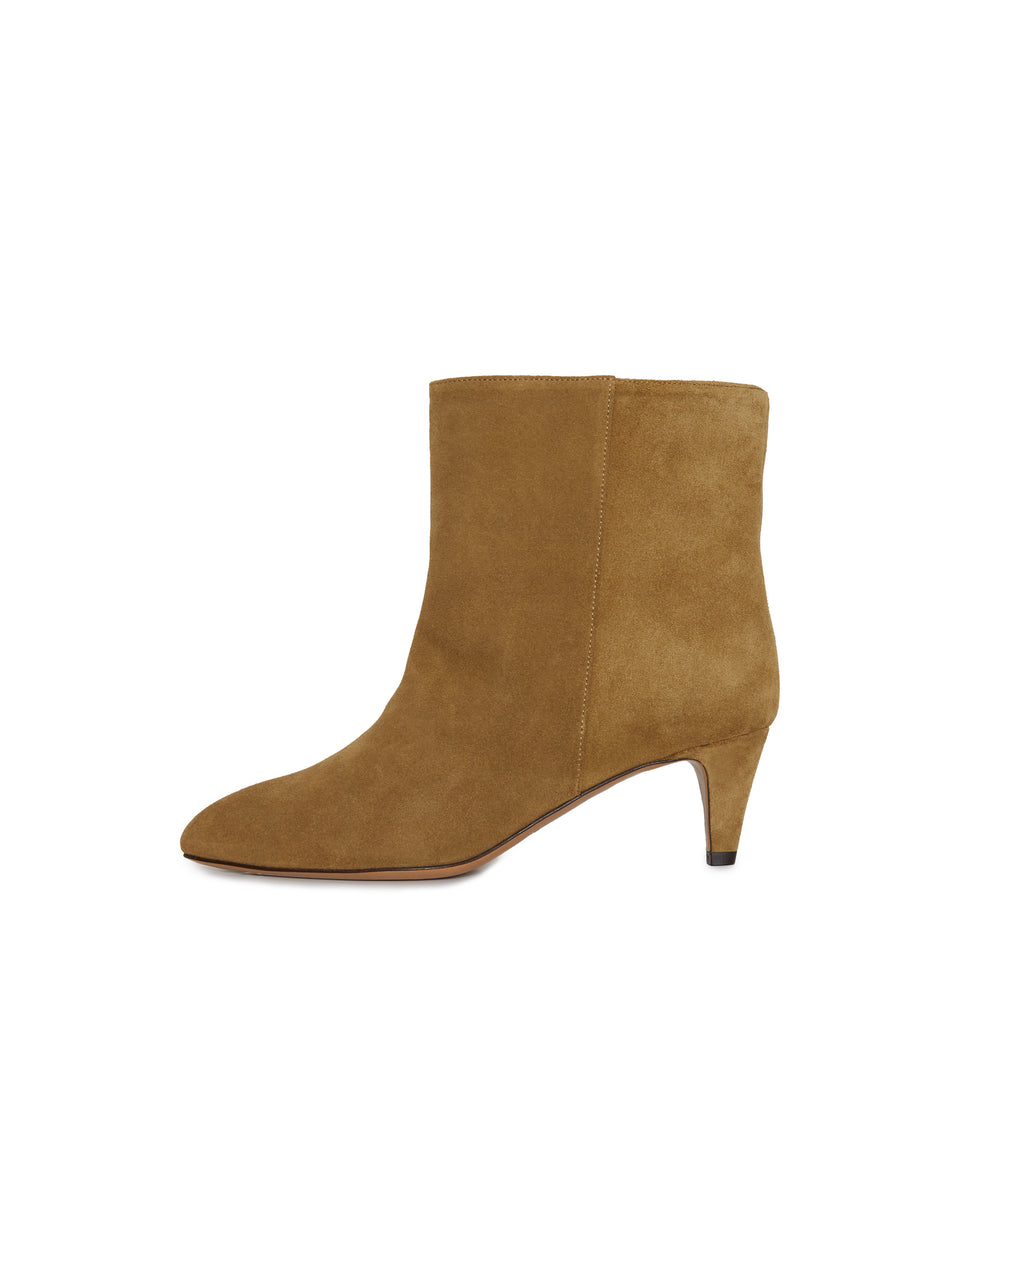 Daxi Suede City Boots